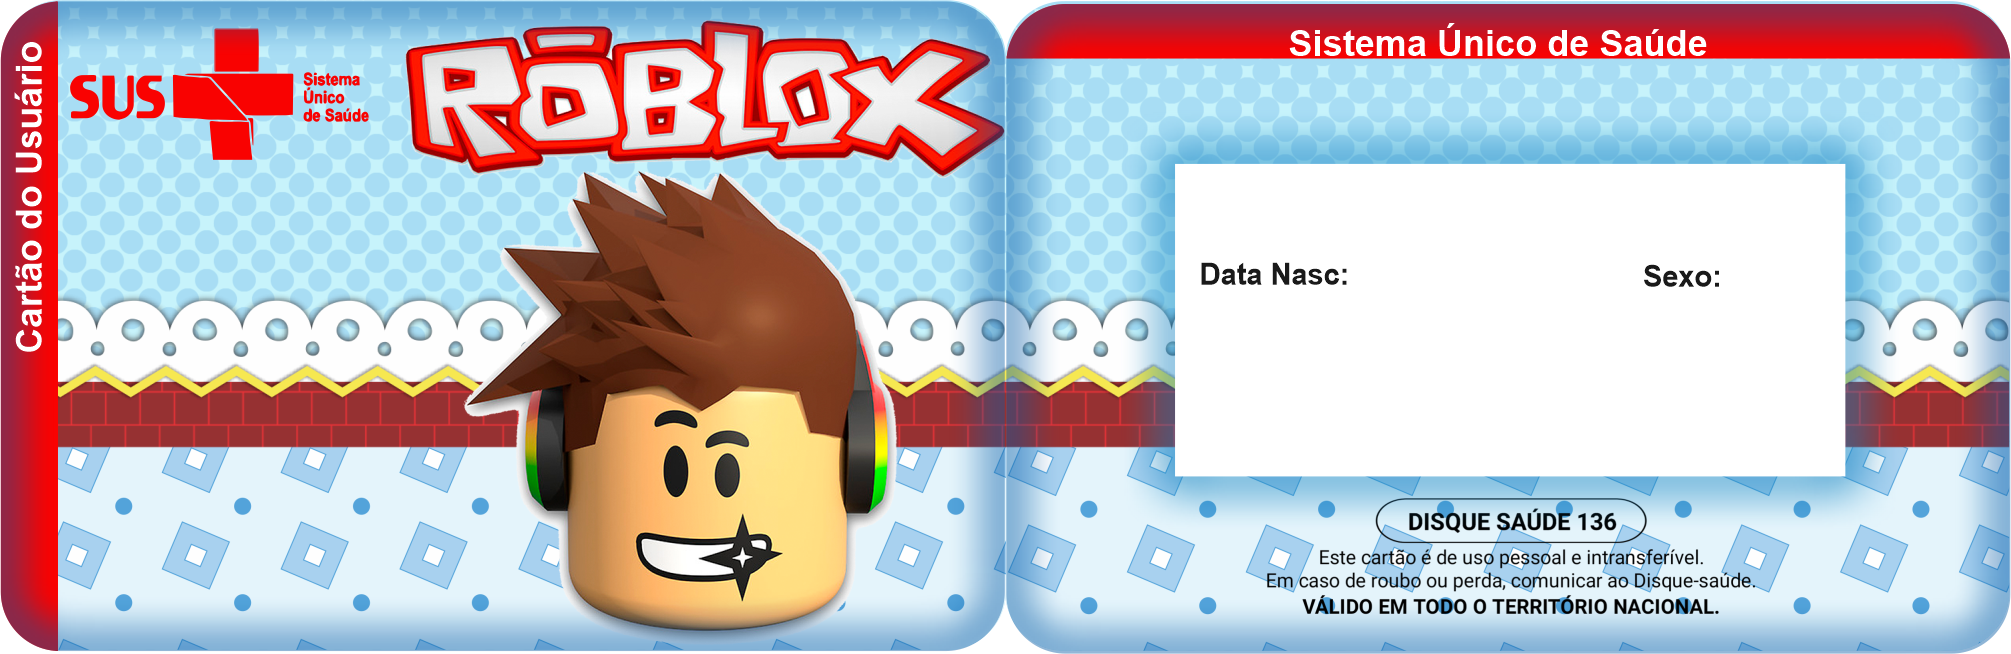 Roblox IS GETTING SUS 